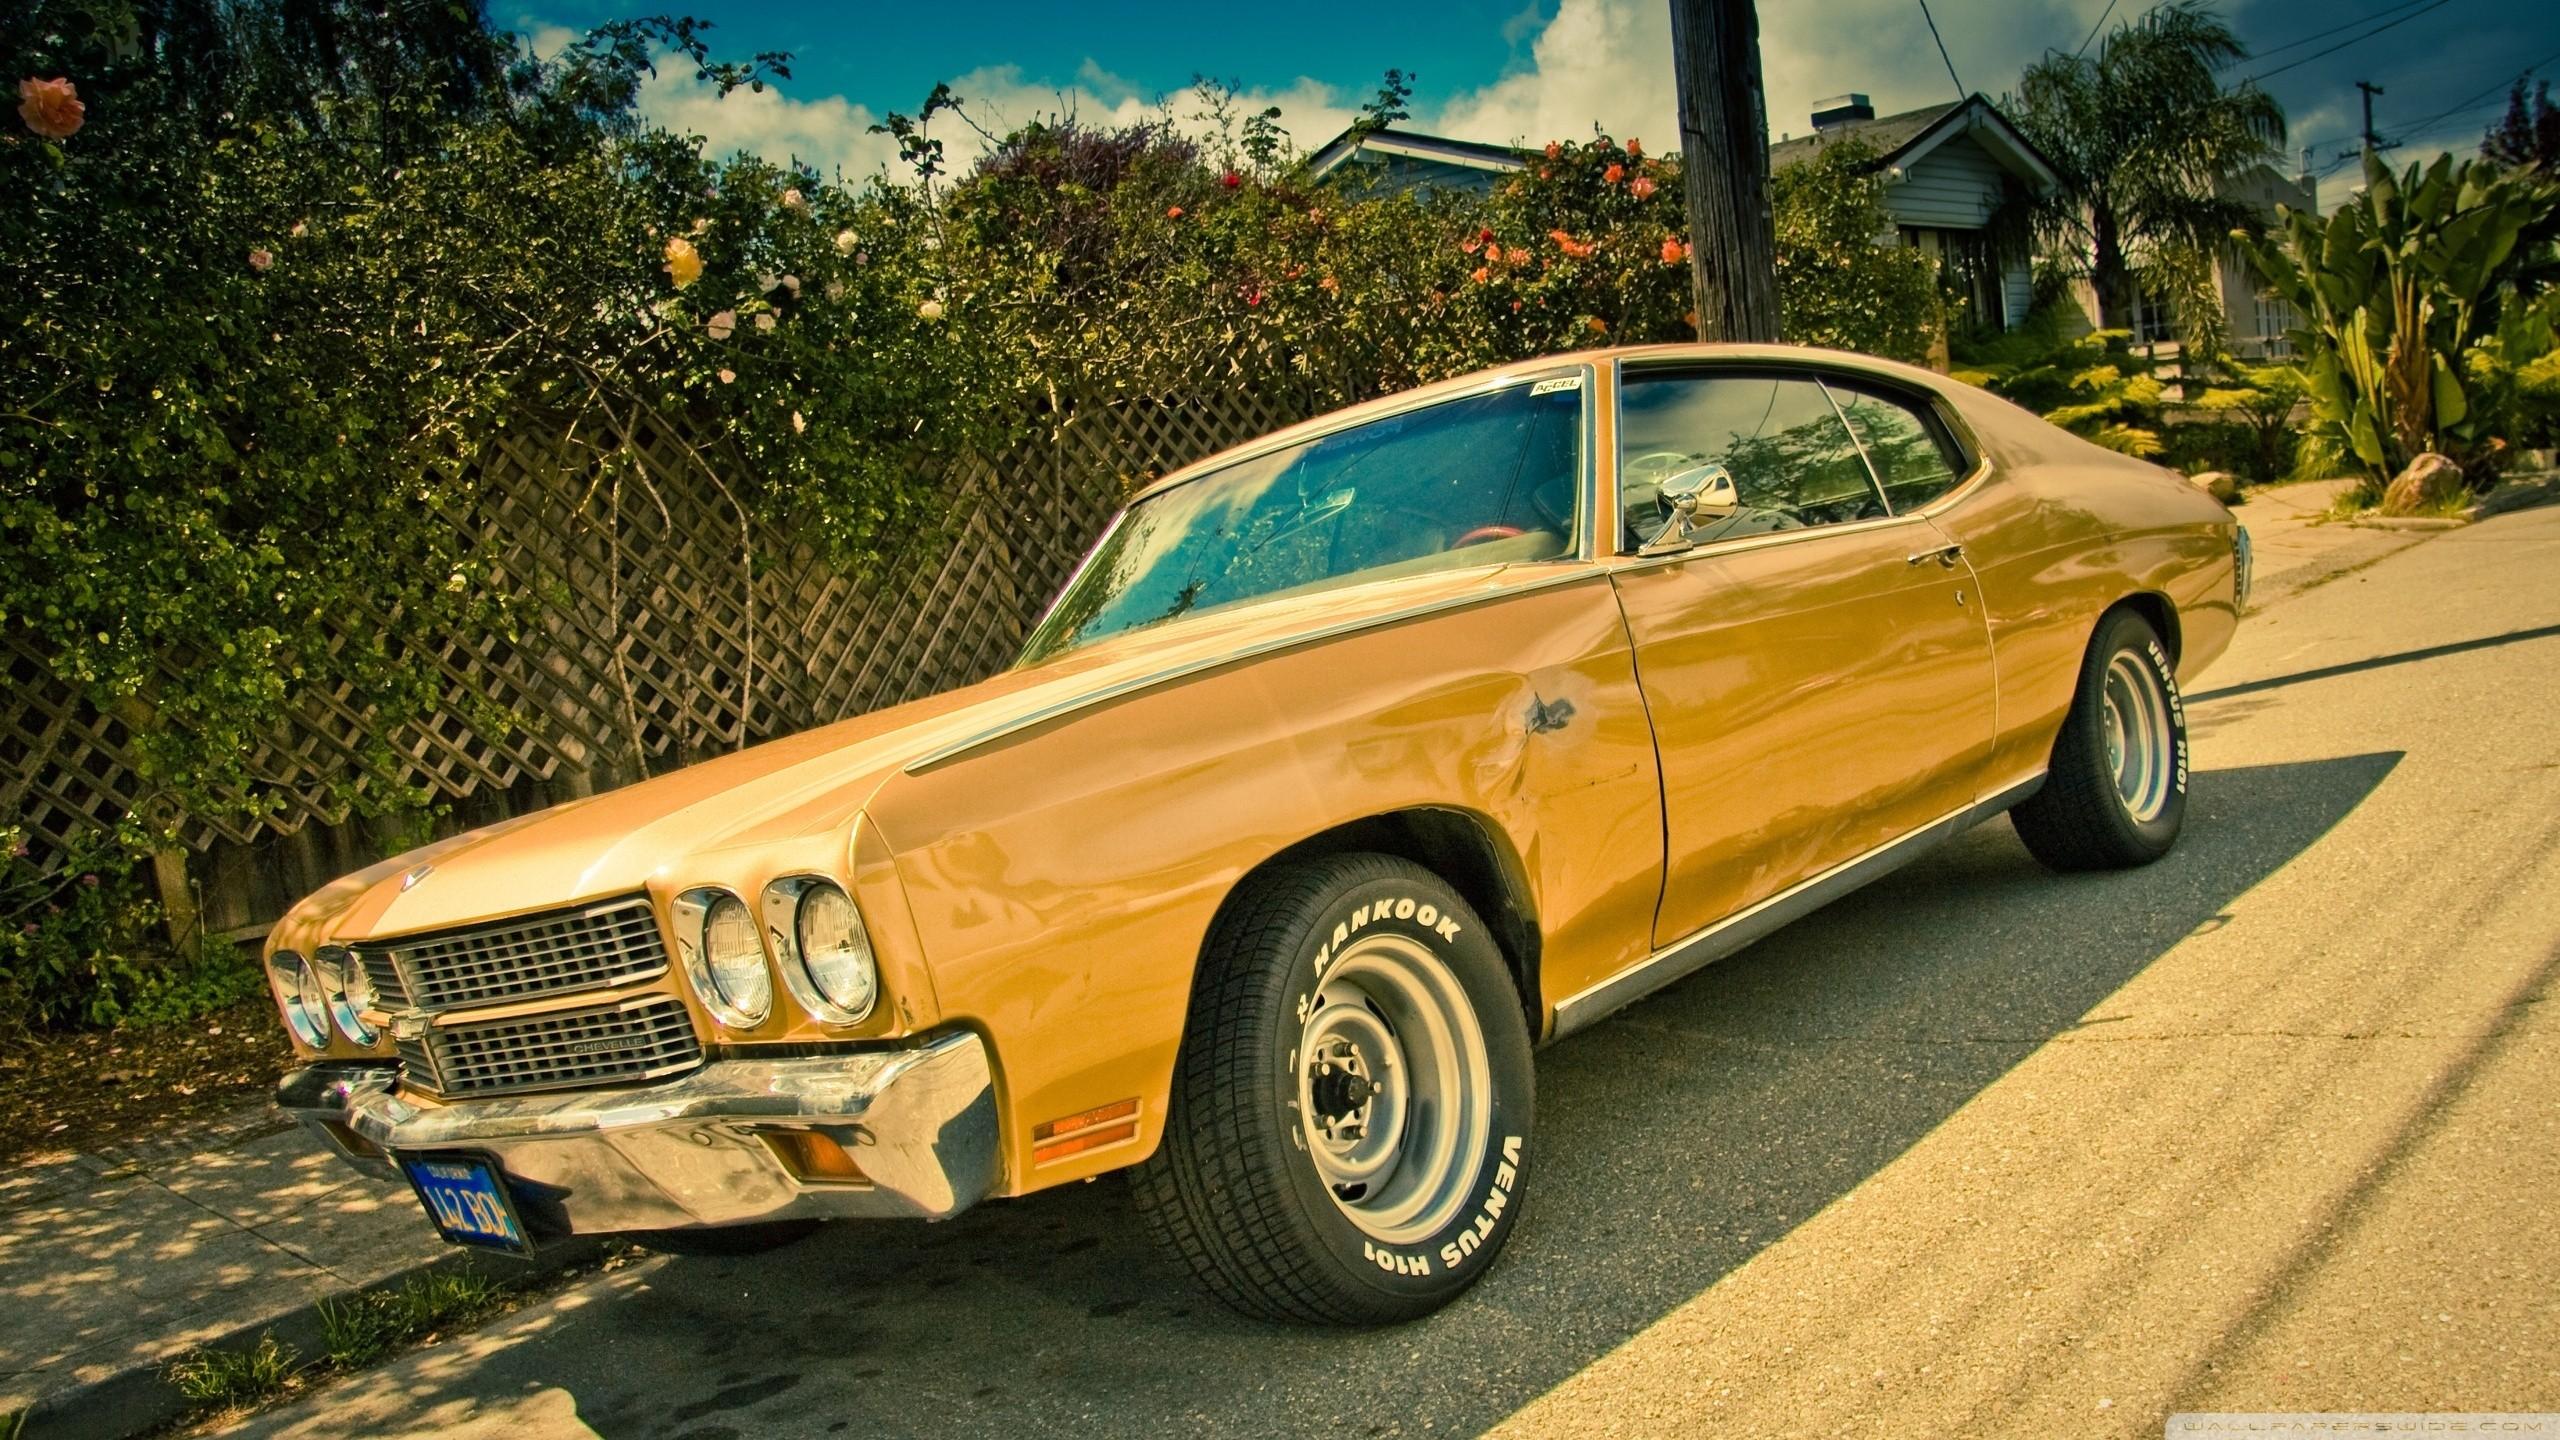 Chevrolet Chevelle SS Wallpapers HD Download 2560x1440